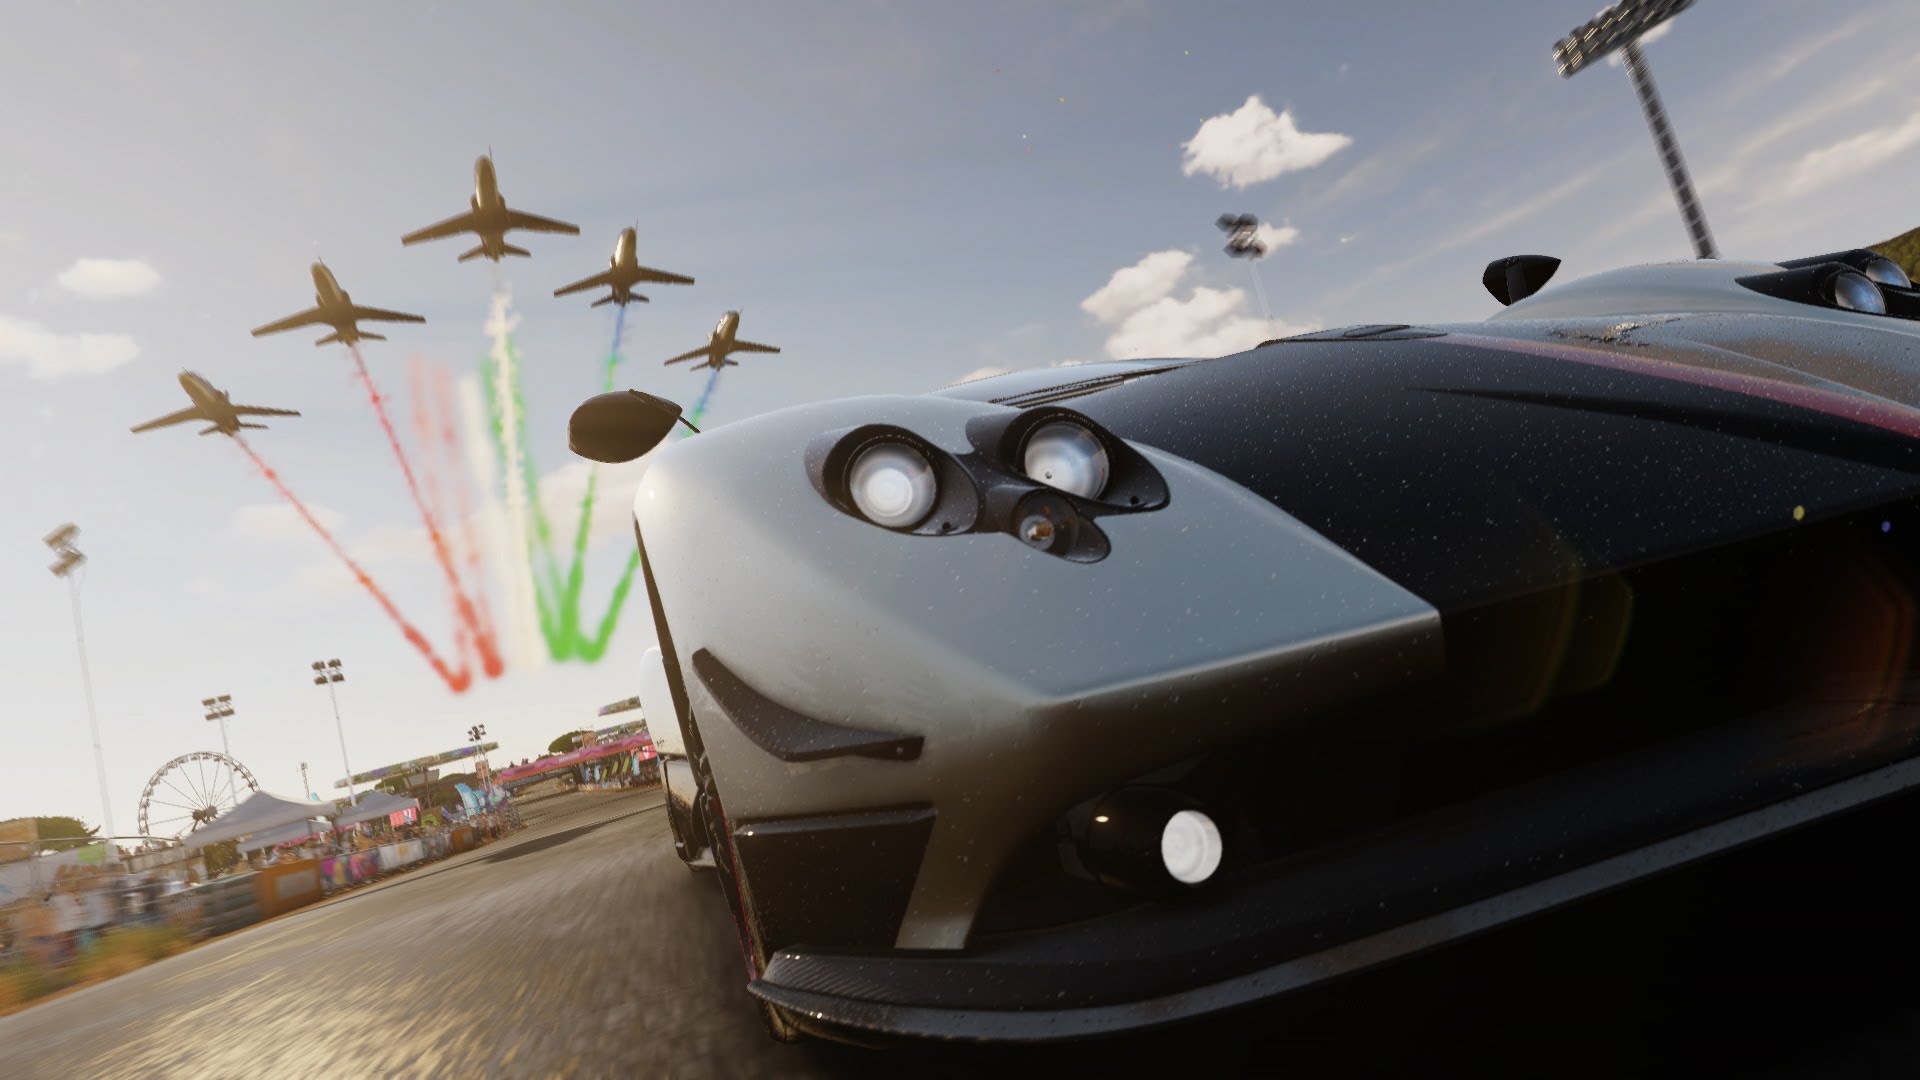 Forza Horizon 2 Opens Up a Whole New World for Racers - Xbox Wire